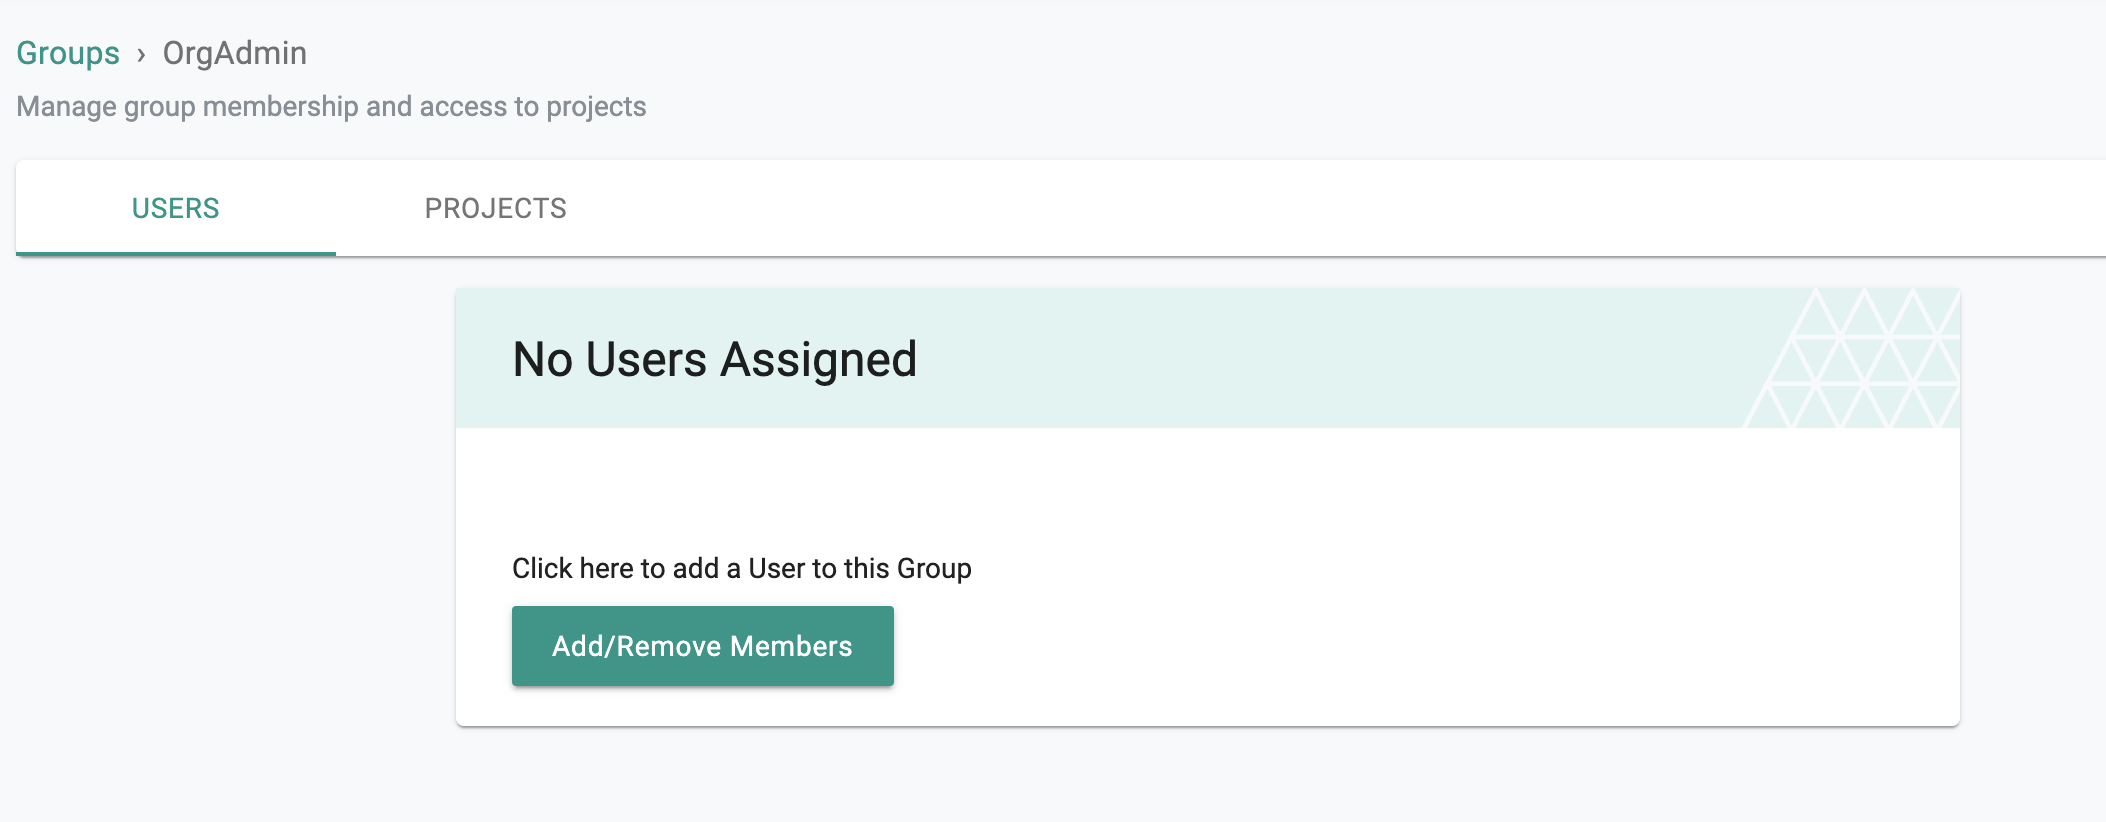 Users in Group